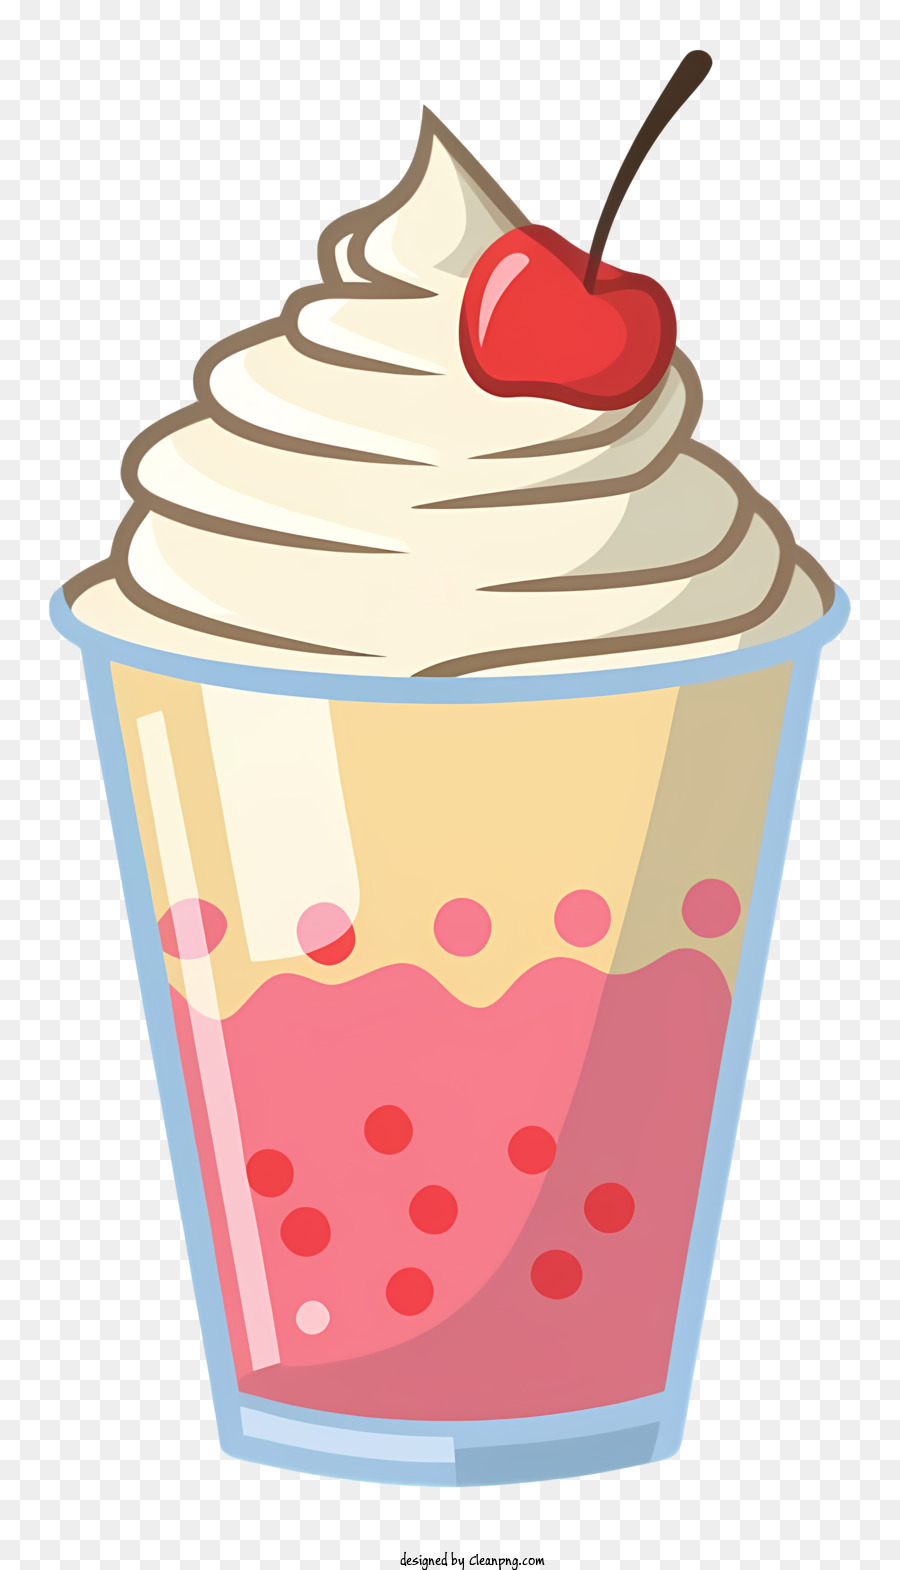 How to Draw a Detailed Ice Cream Cone (with Pictures) - wikiHow Fun